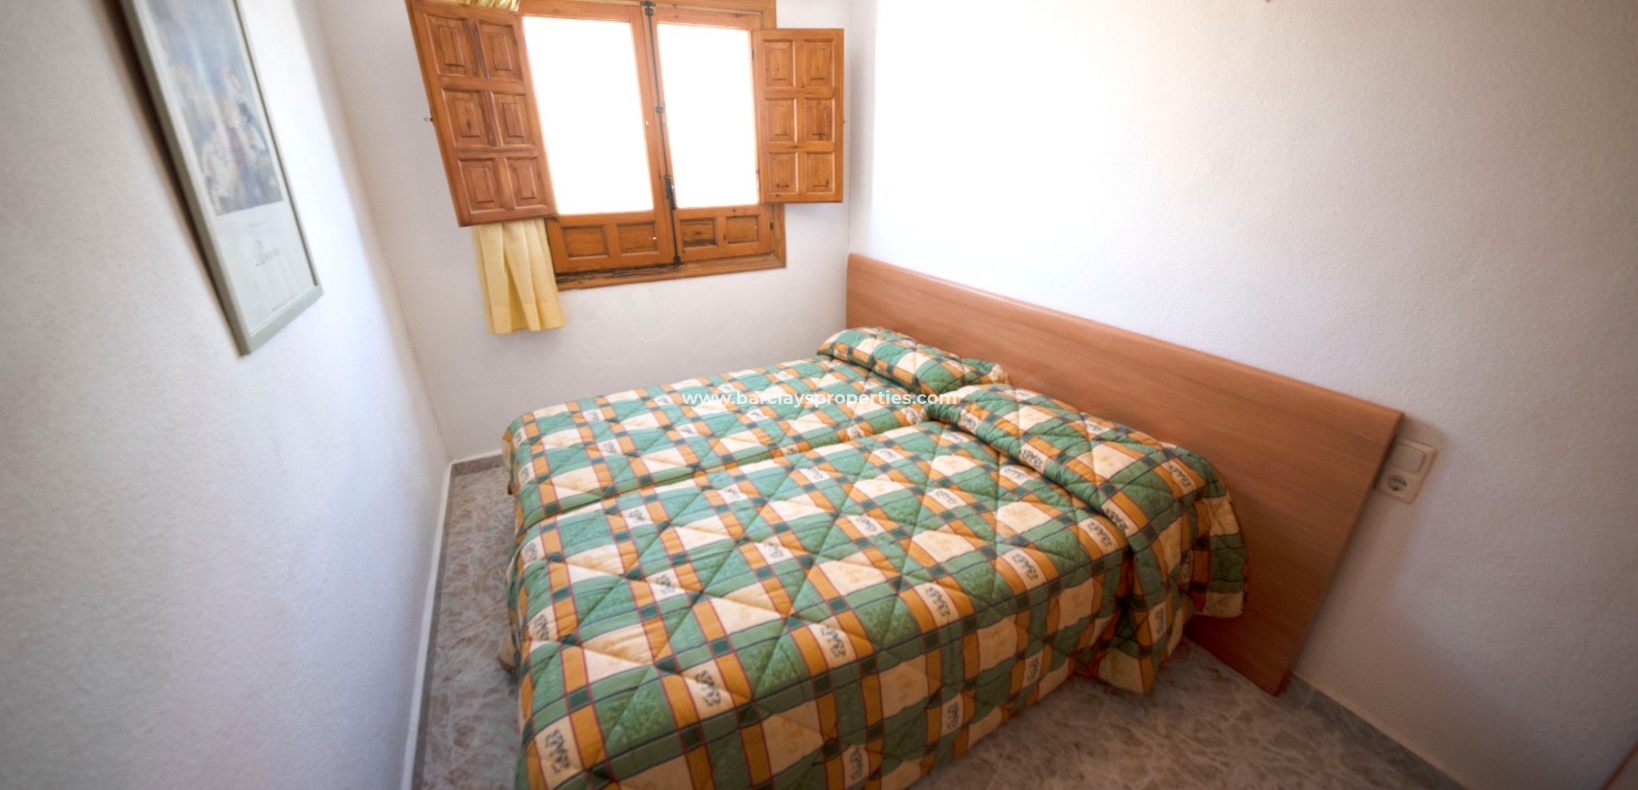 Bedroom - Cheap House For Sale in La Marina